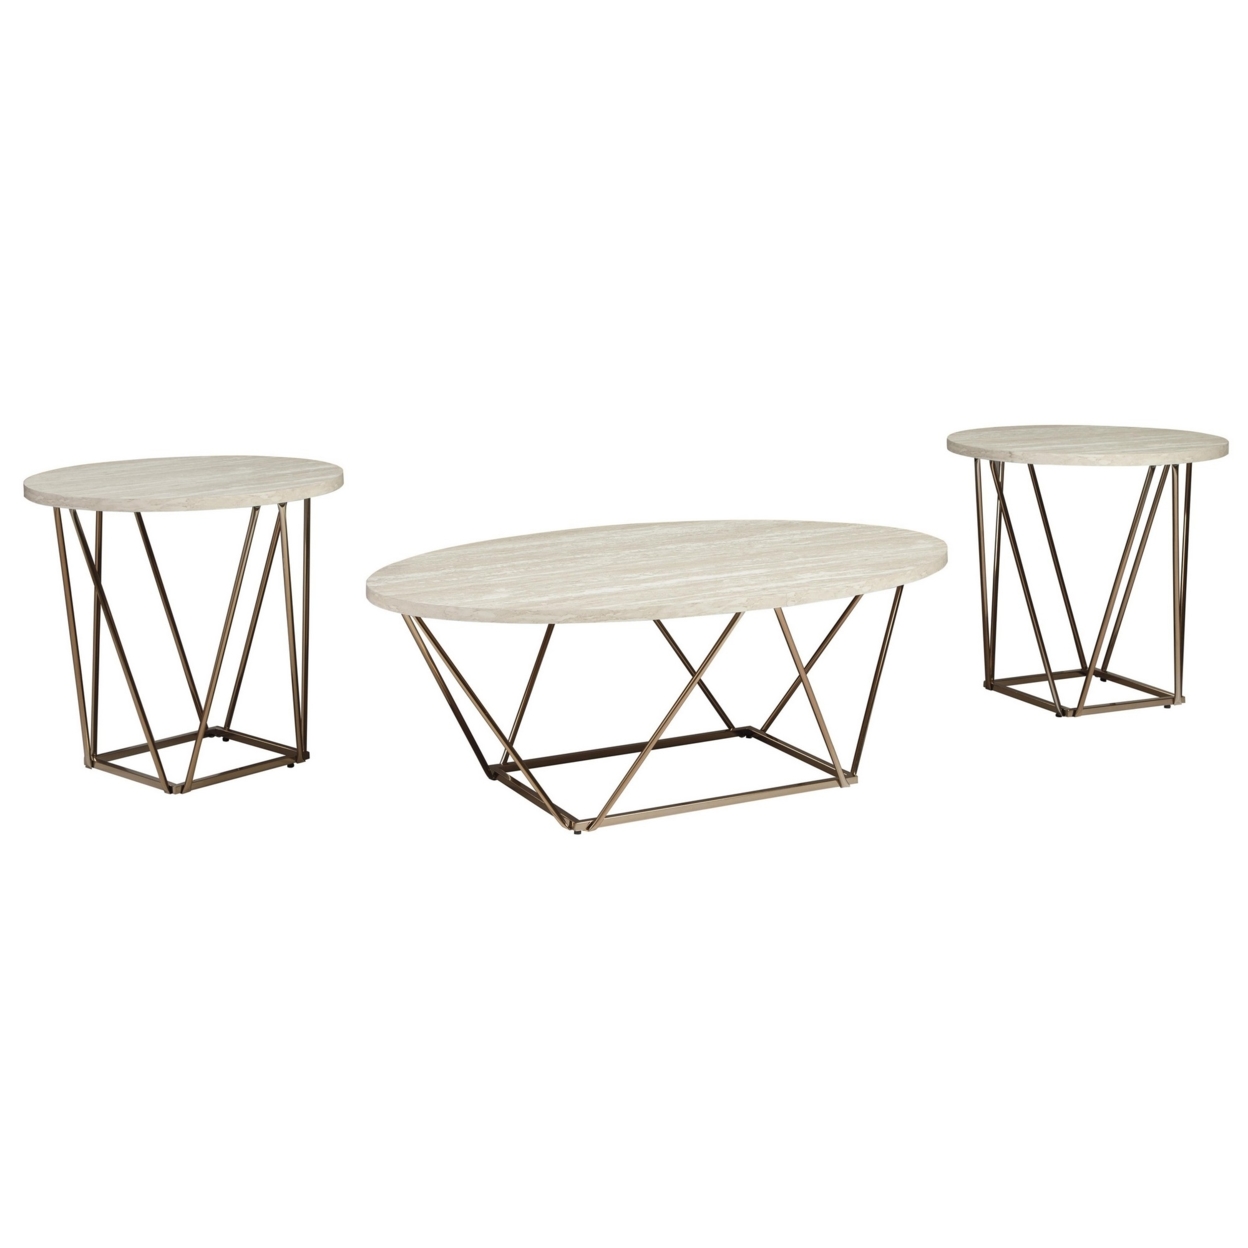 Faux Marble Table Set With 1 Coffee Table And 2 End Tables, White And Gold- Saltoro Sherpi